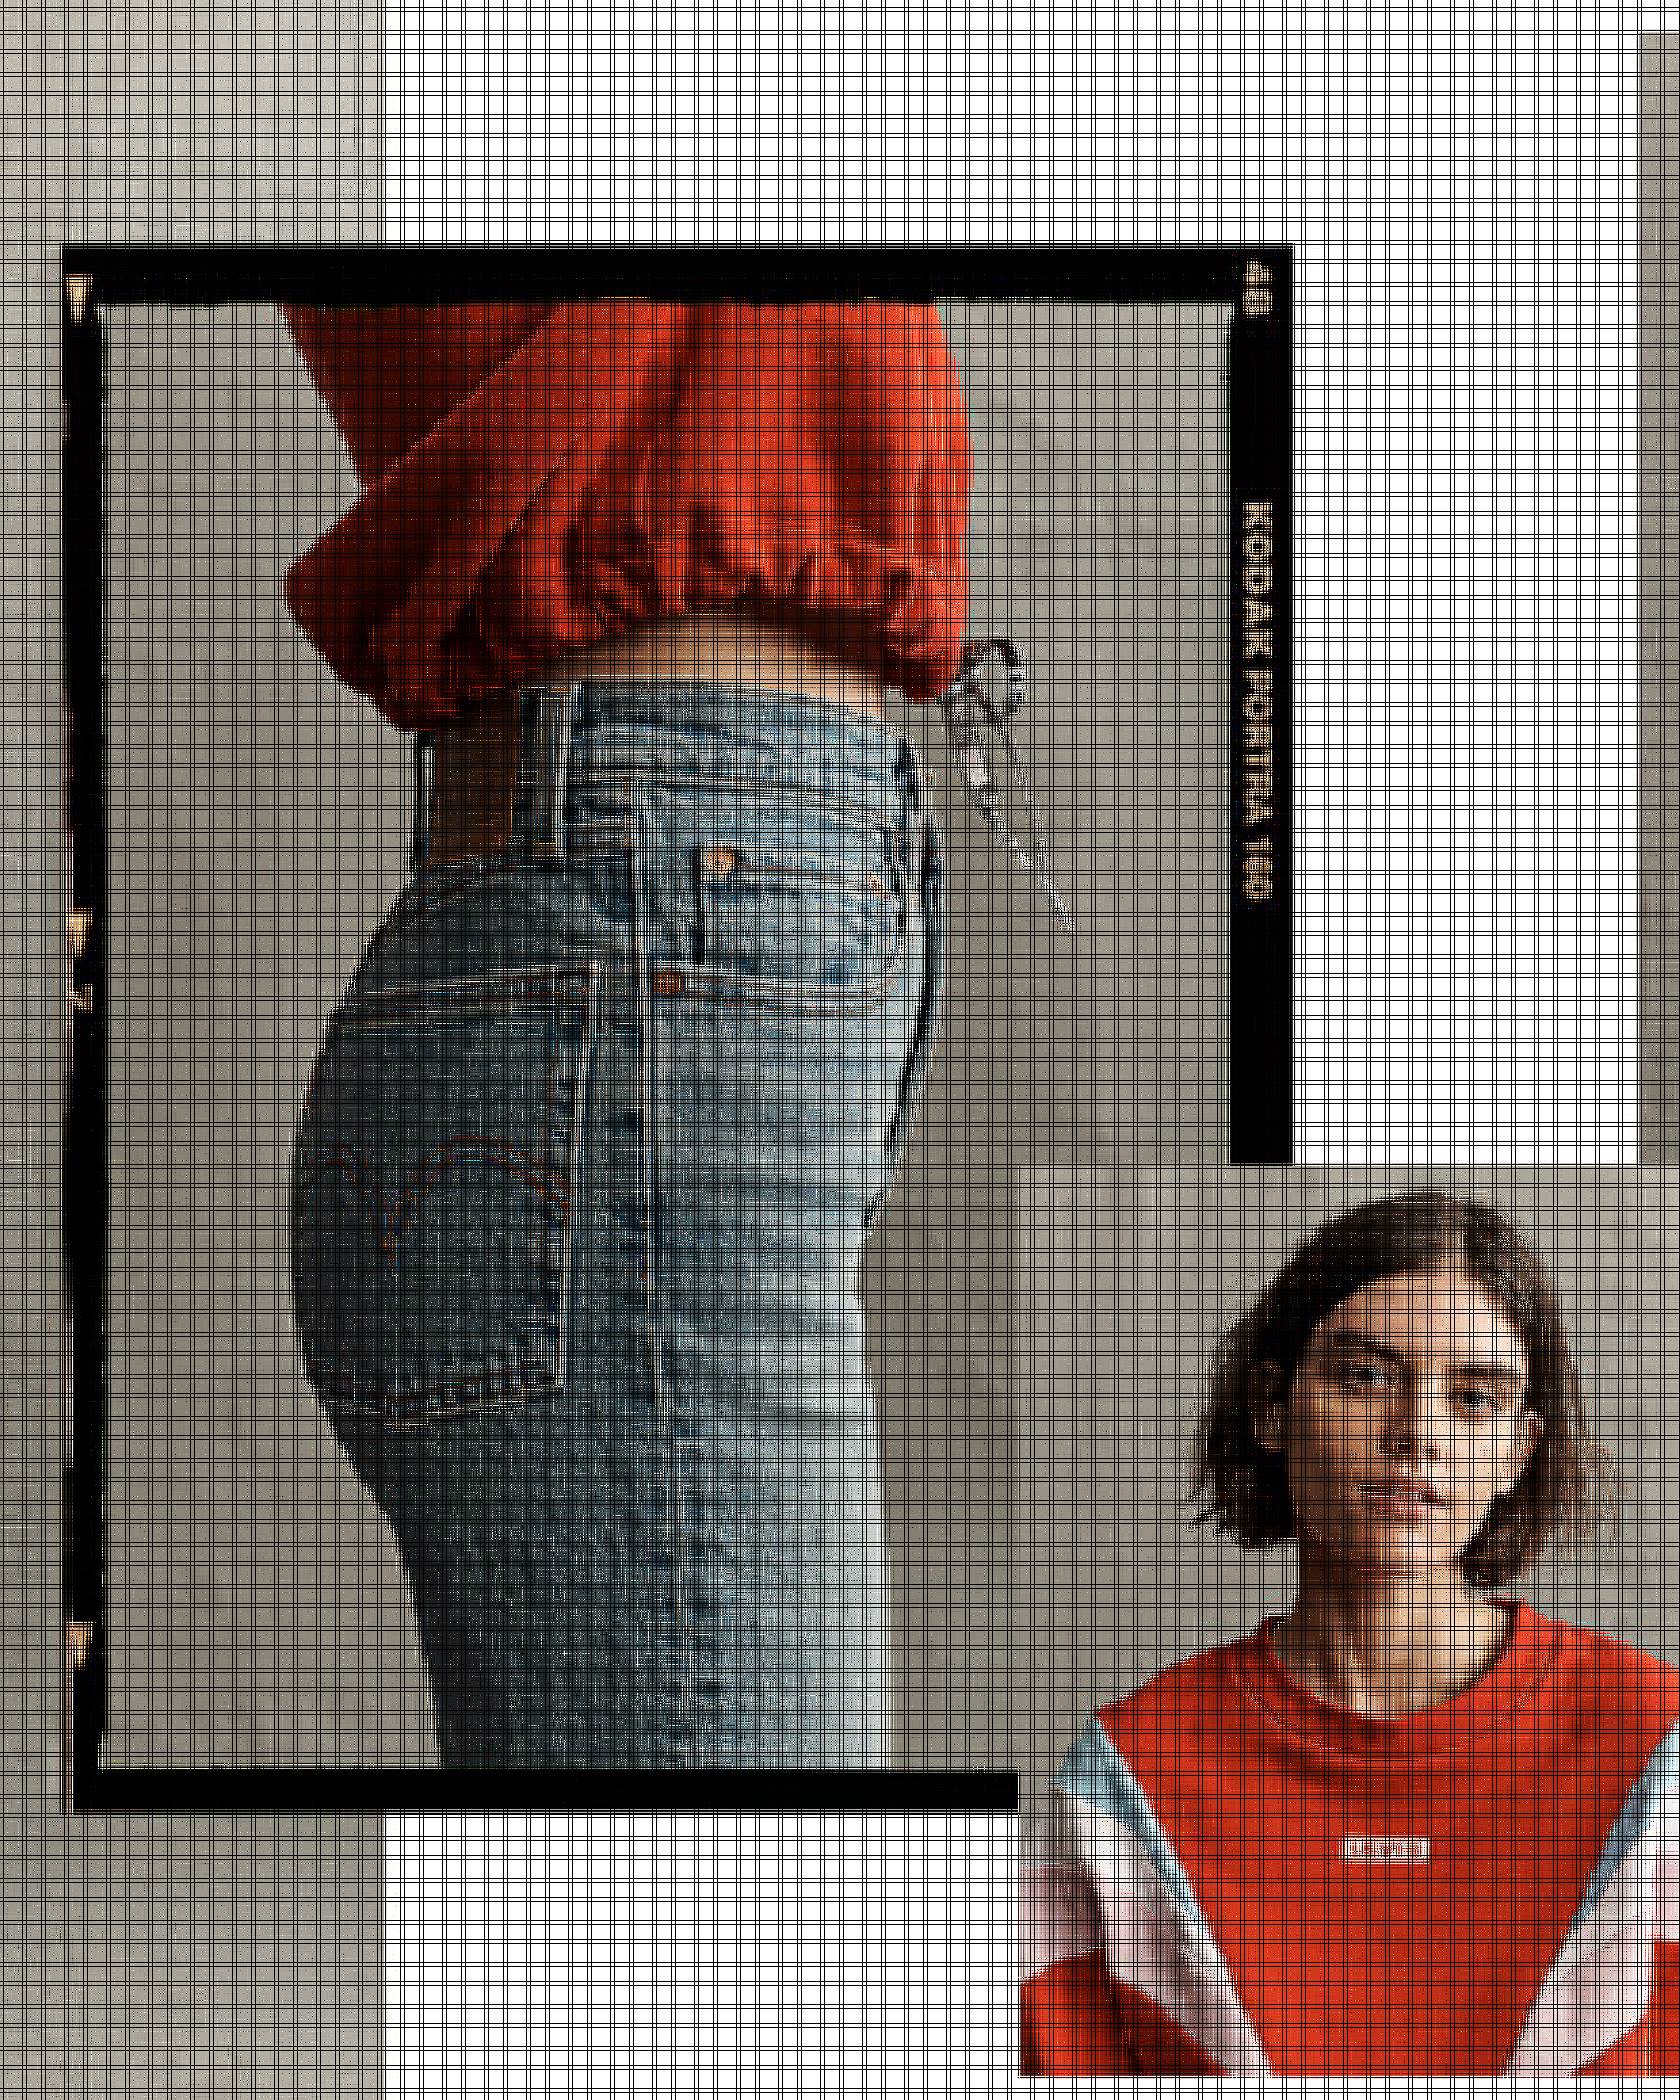 woman wearing high rise denim jeans and red sweatshirt